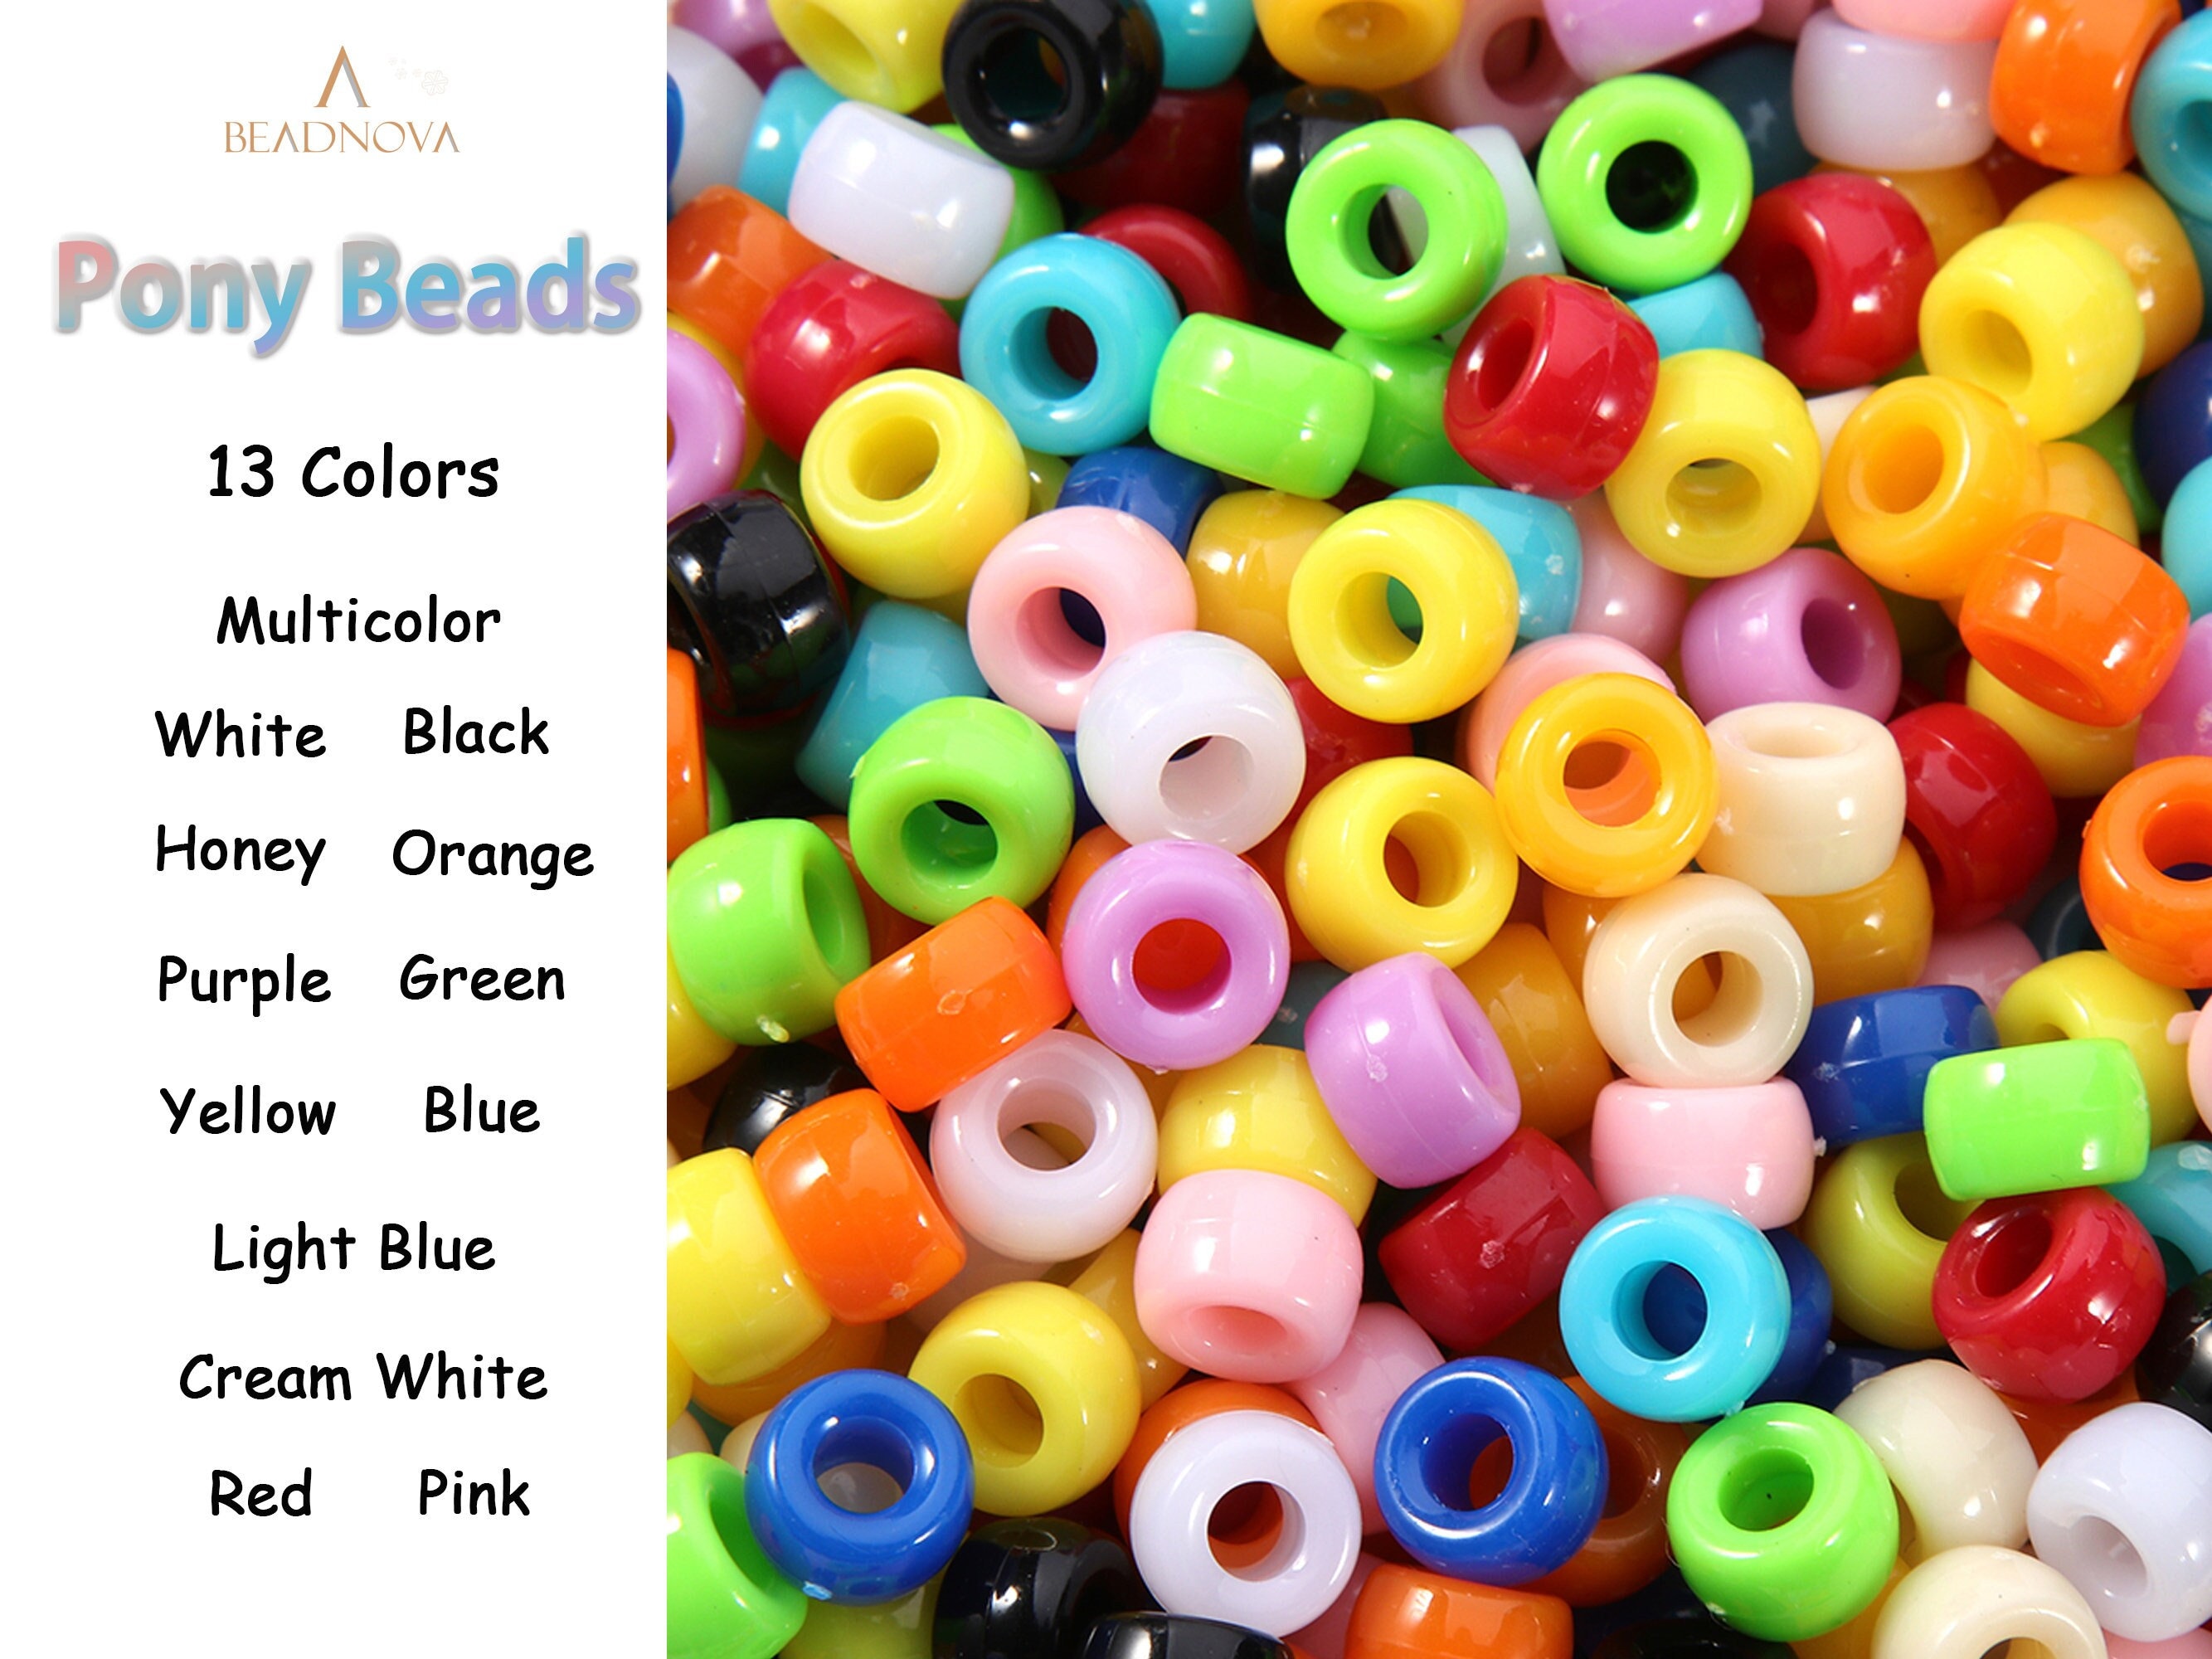 1000Pcs Pony Beads Bracelet 9mm White Plastic Barrel Pony Beads for  Necklace,Hair Beads for Braids for Girls,Key Chain,Jewelry Making (White)